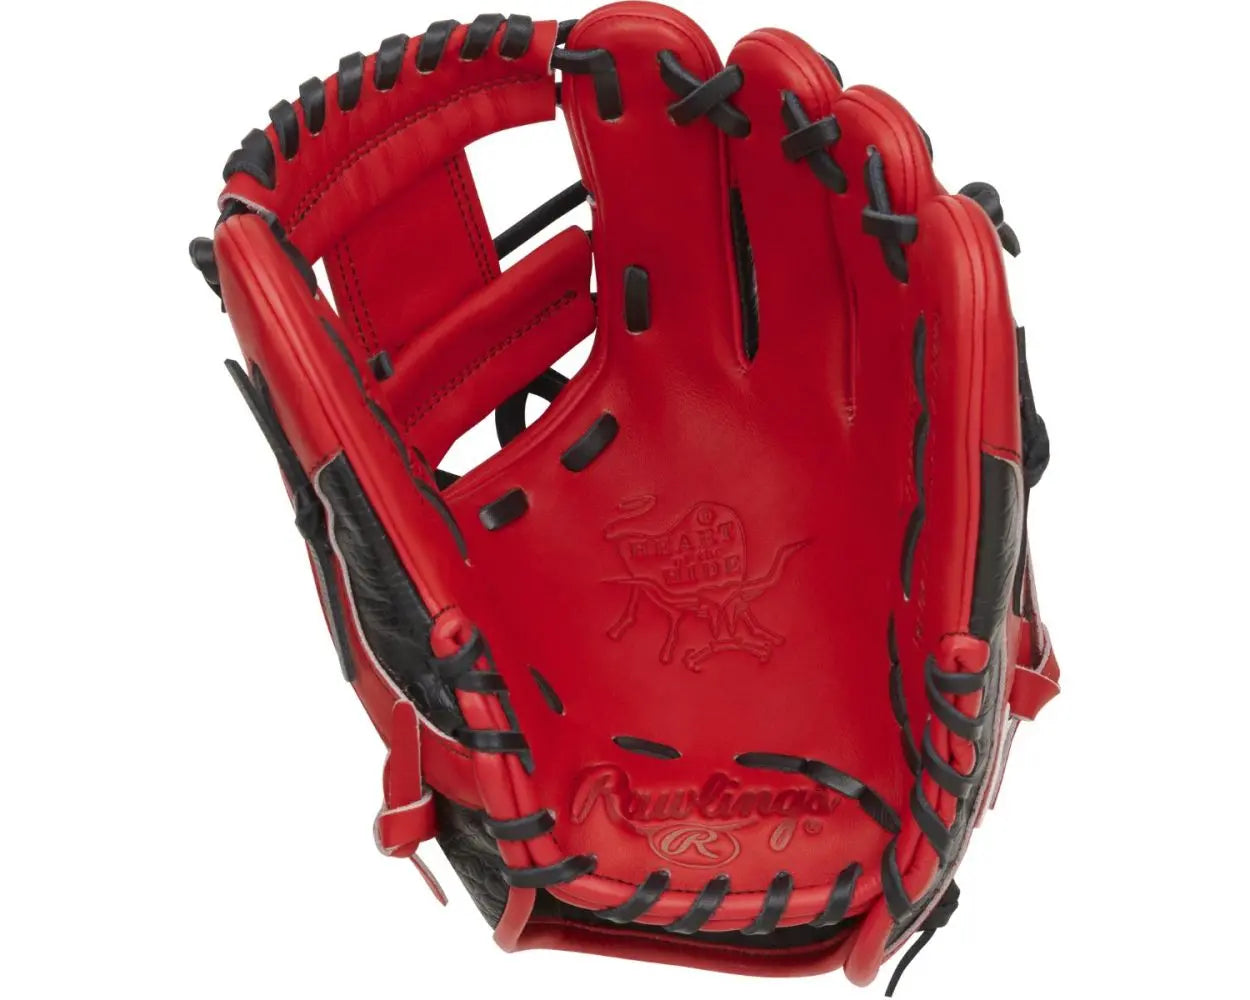 RAWLINGS COLORSYNC 8.0 HEART OF THE HIDE 11.50" INFIELD GLOVE: PRO204-2SCB